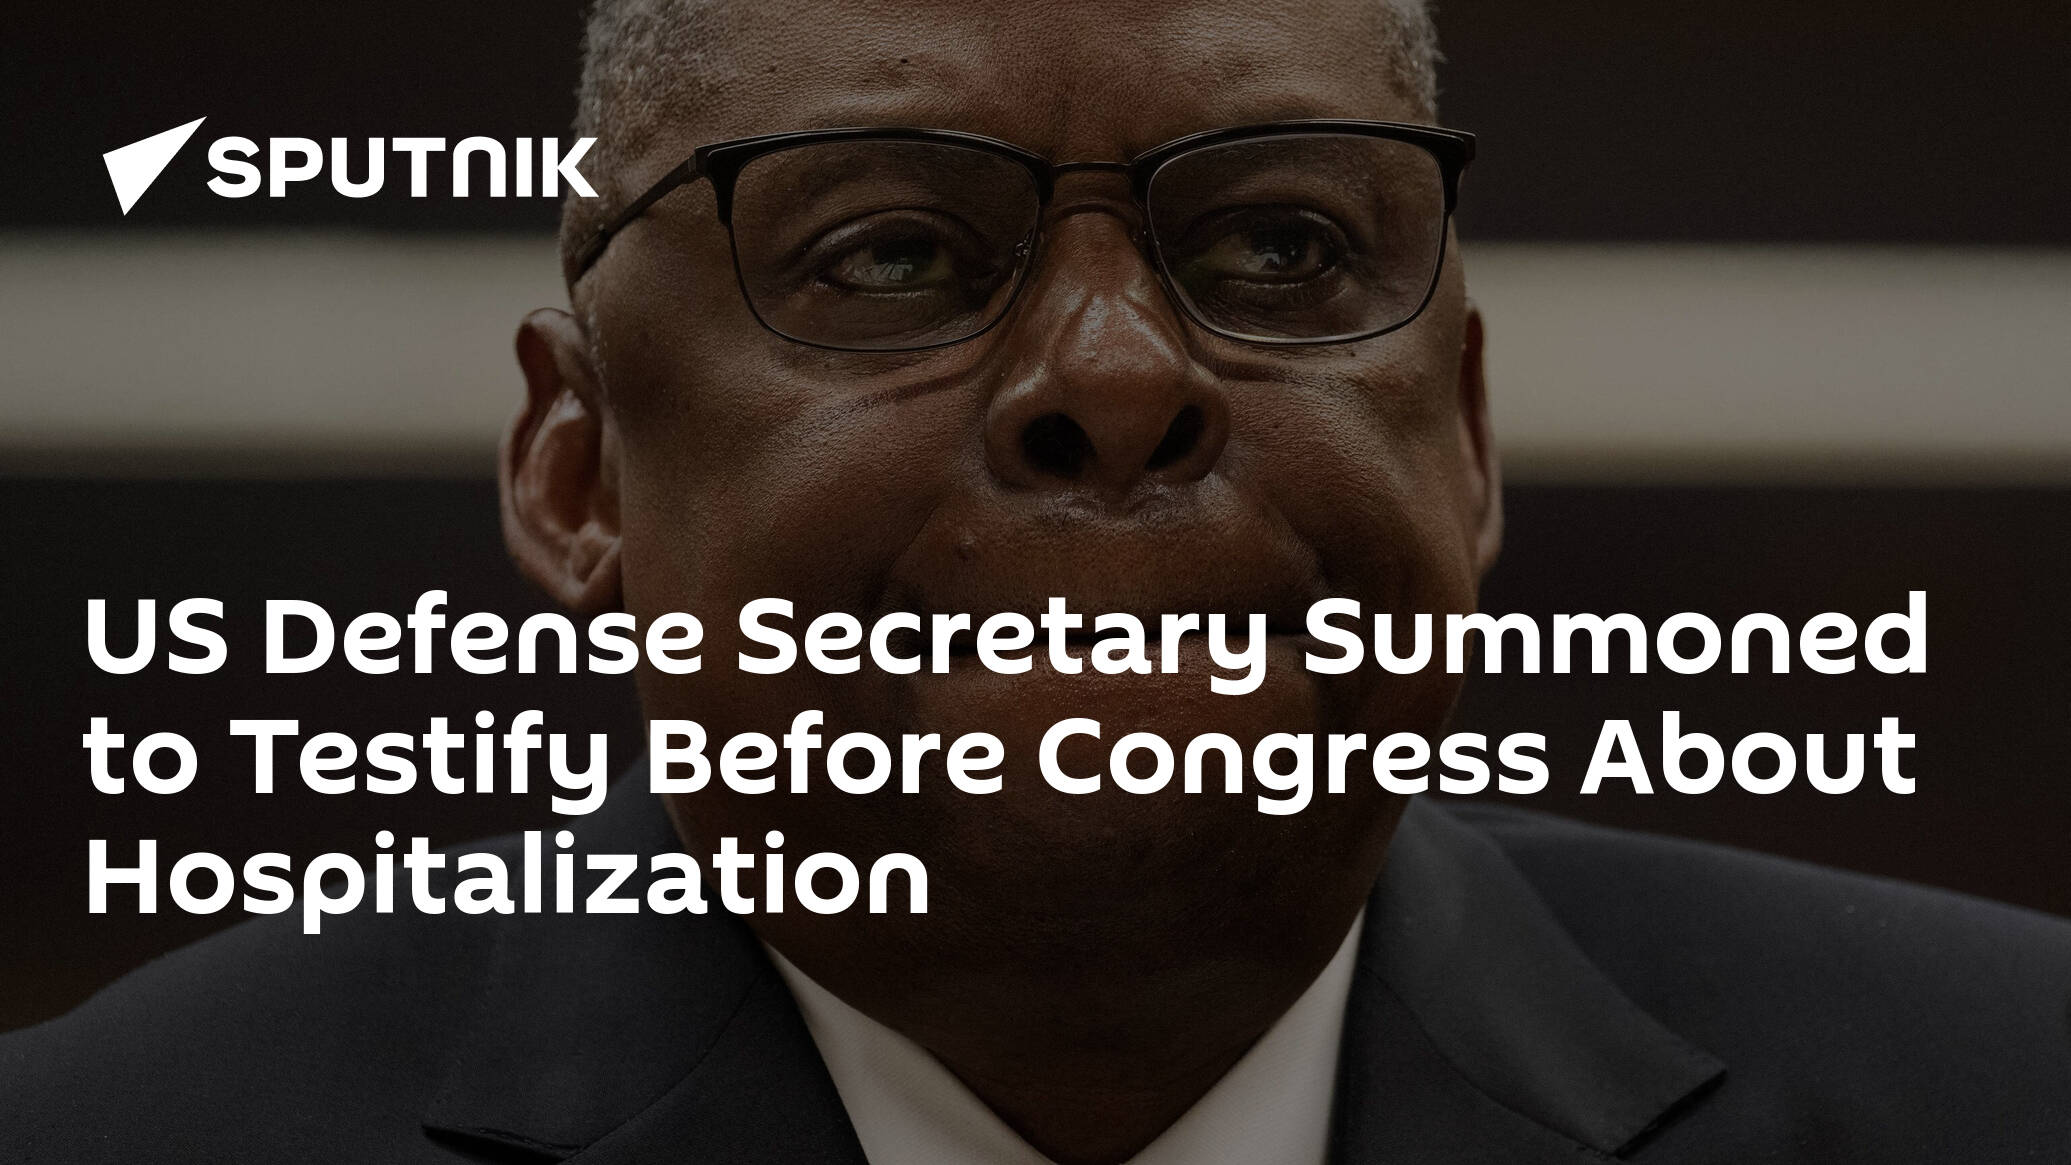 US Defense Secretary Summoned to Testify Before Congress About Hospitalization